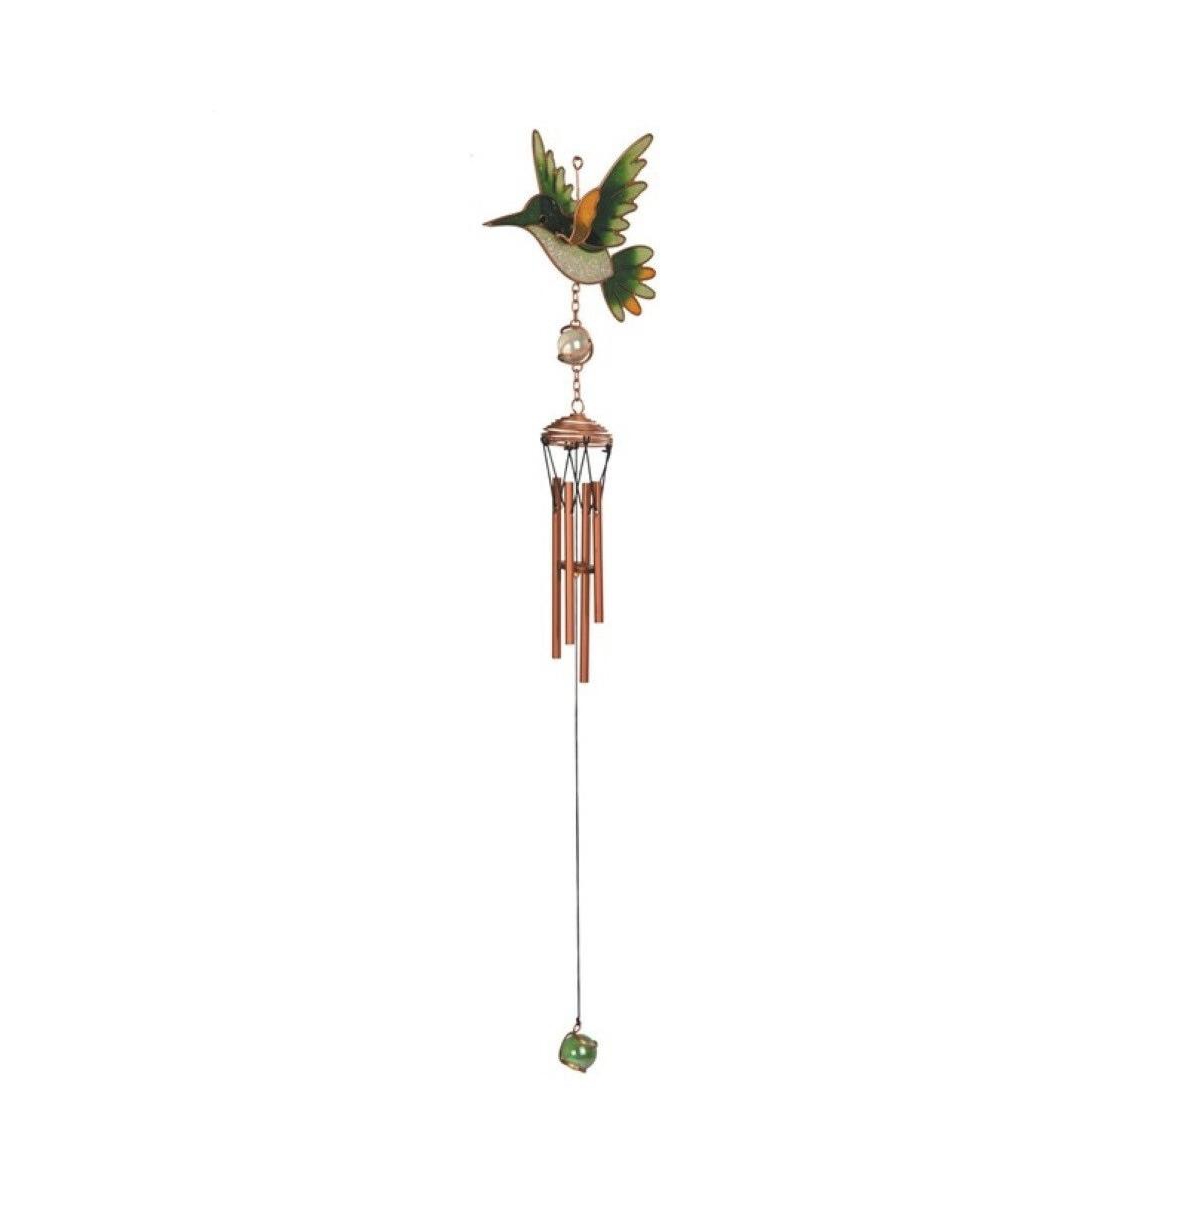 24" Long Green Hummingbird Copper and Gem Wind Chime Home Decor Perfect Gift for House Warming, Holidays and Birthdays - Multi-color